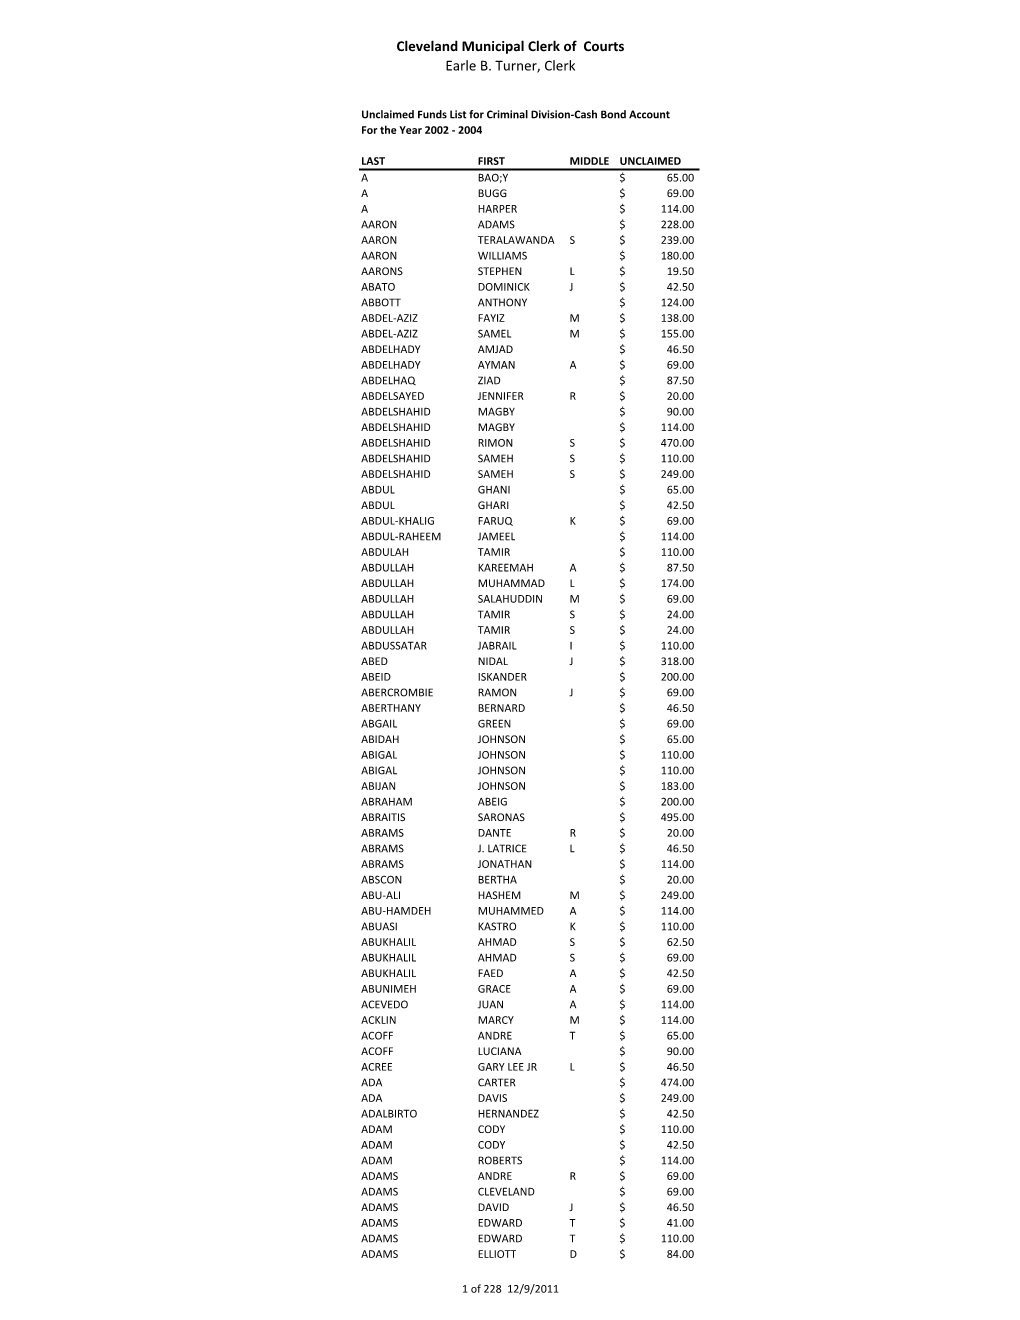 Unclaimed Funds List for Criminal Division‐Cash Bond Account for the Year 2002 ‐ 2004